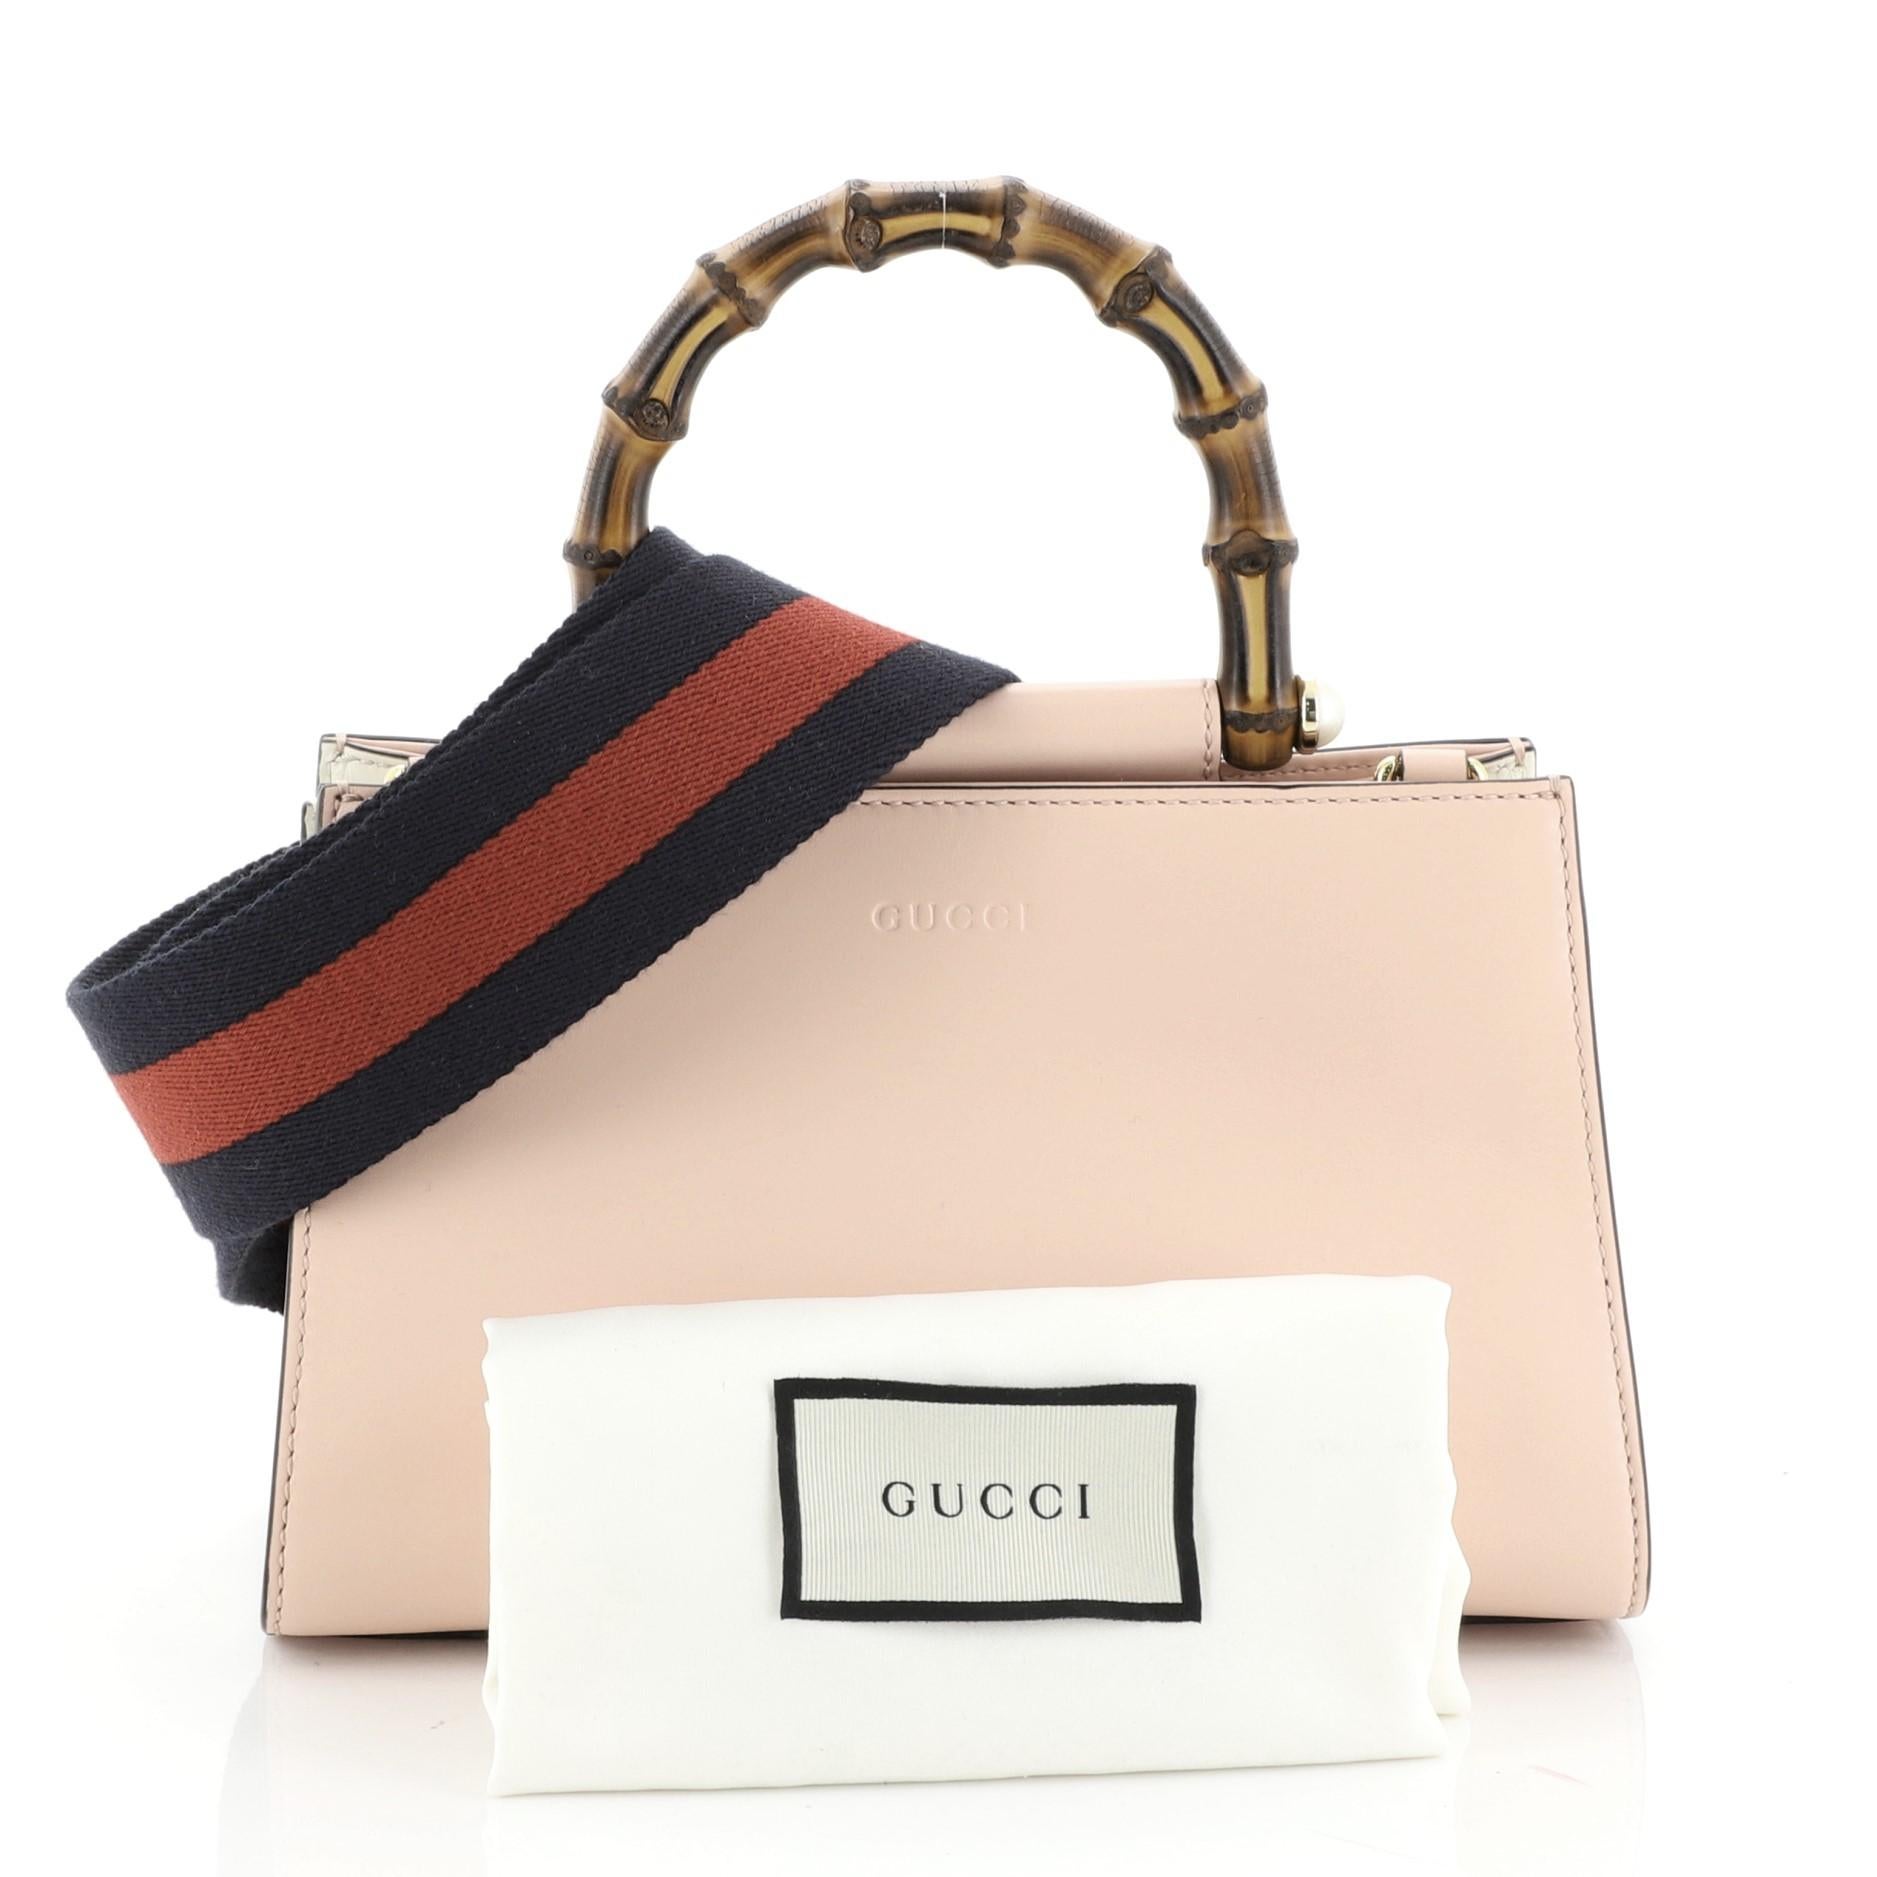 This Gucci Nymphaea Top Handle Bag Leather Mini, crafted in pink leather, features a bamboo handle with pearls and gold-tone hardware. Its magnetic snap closure opens to a gray microfiber interior with zip and slip pockets. These are professional